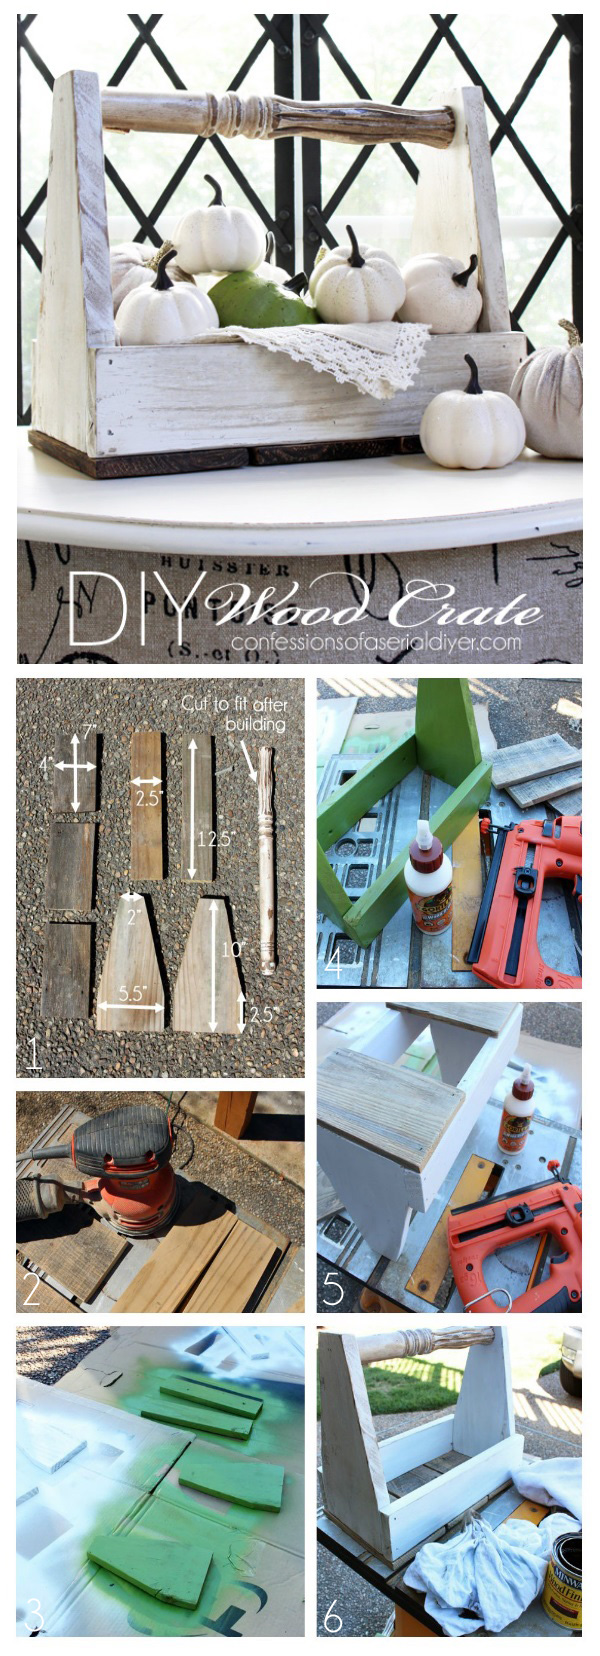 Wood crate made from discarded fencing and an old chair spindle. See how easy it is to make here! Confessions of a Serial Do-it-Yourselfer